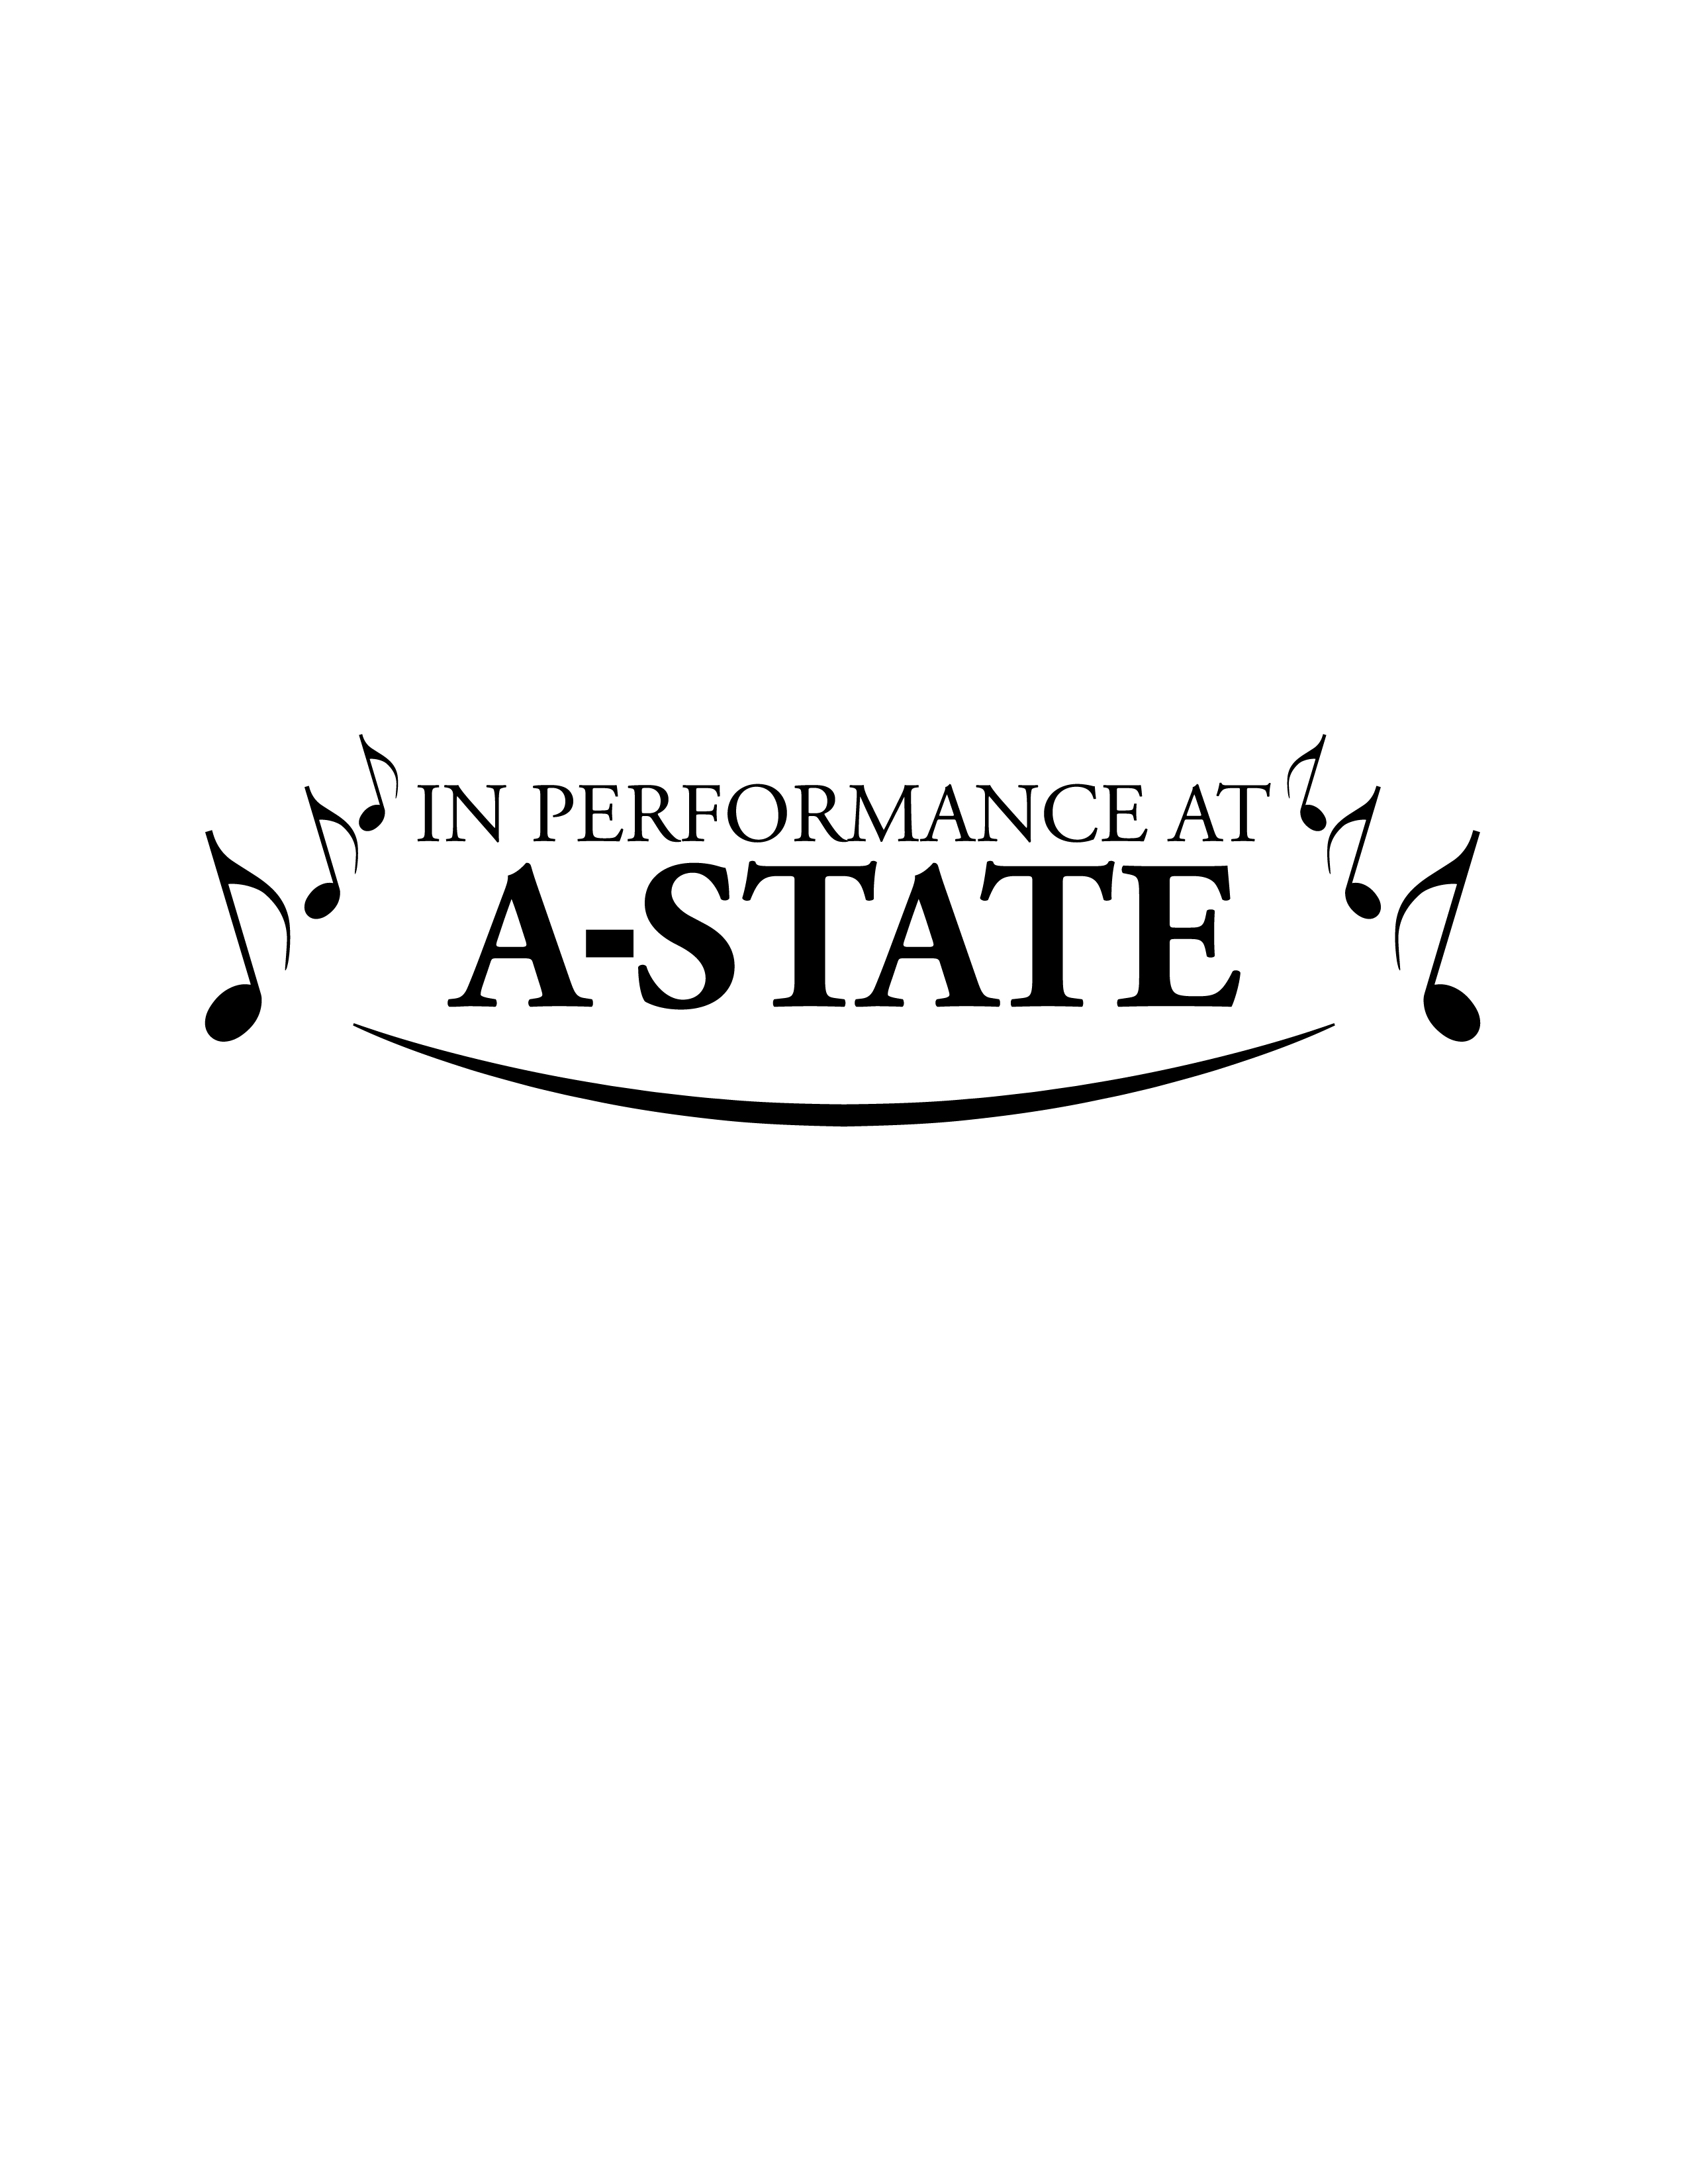 In Performance at A-State